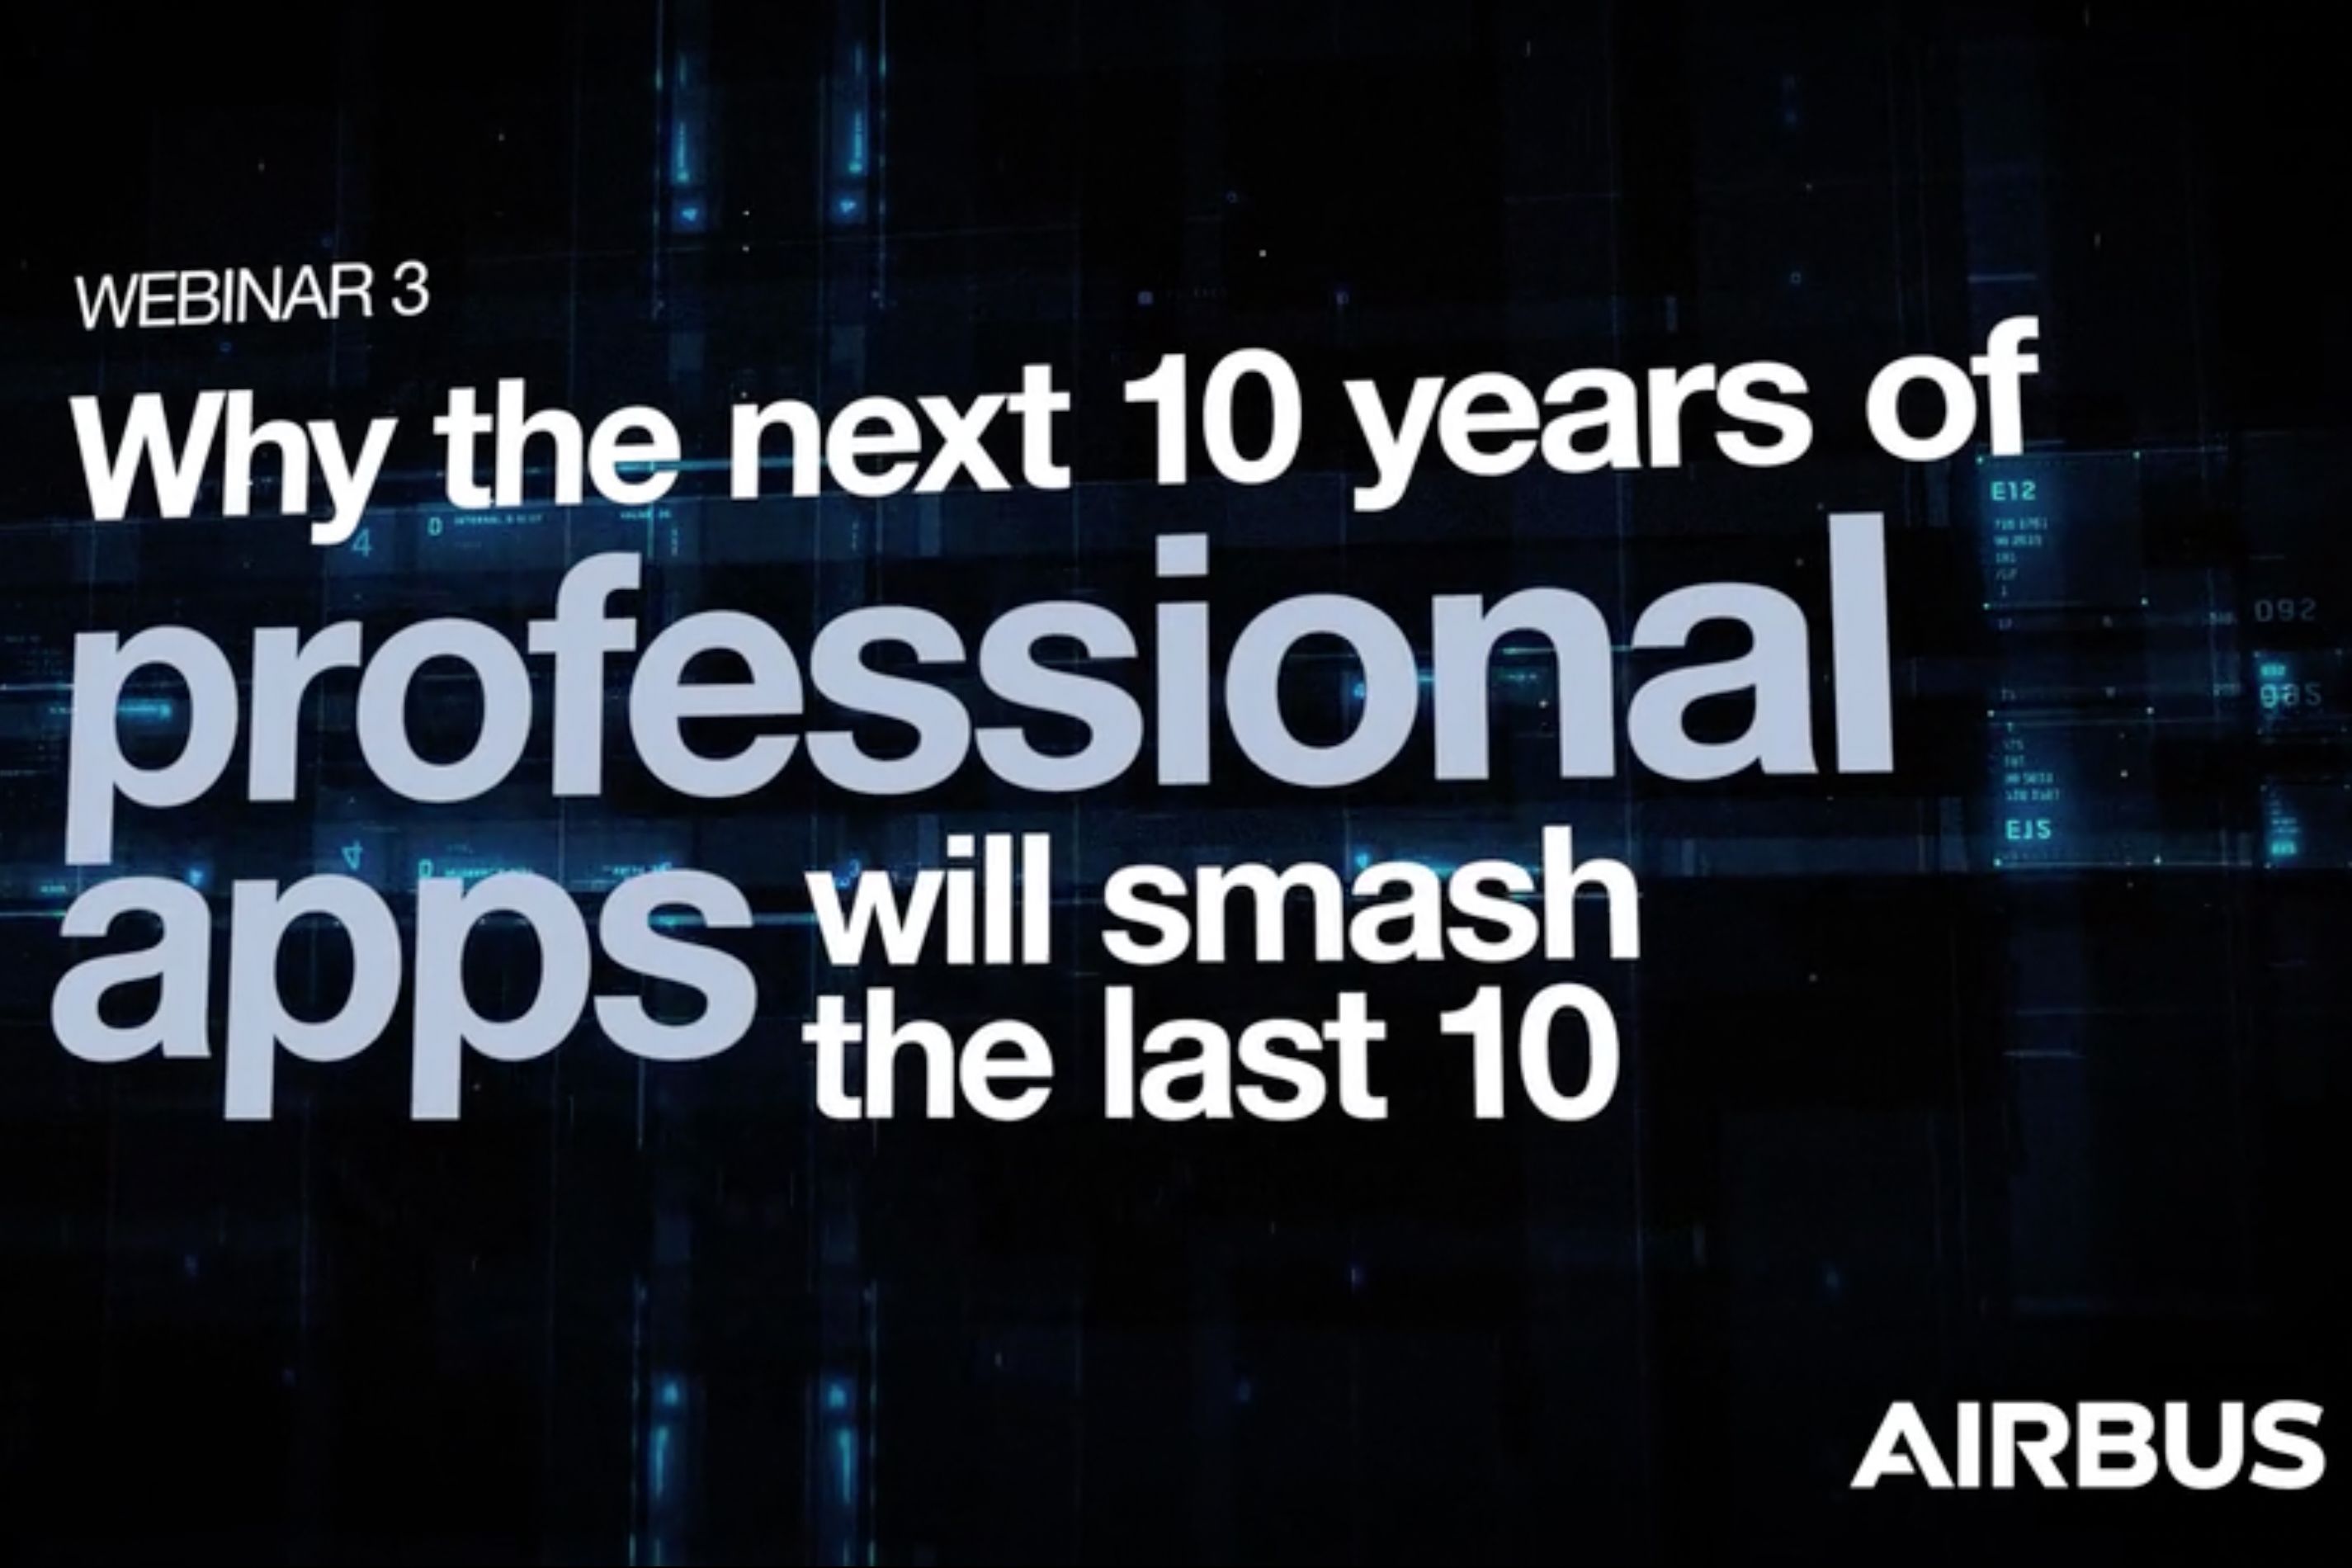 Webinar 3: Why the next 10 years of professional apps will smash the last 10